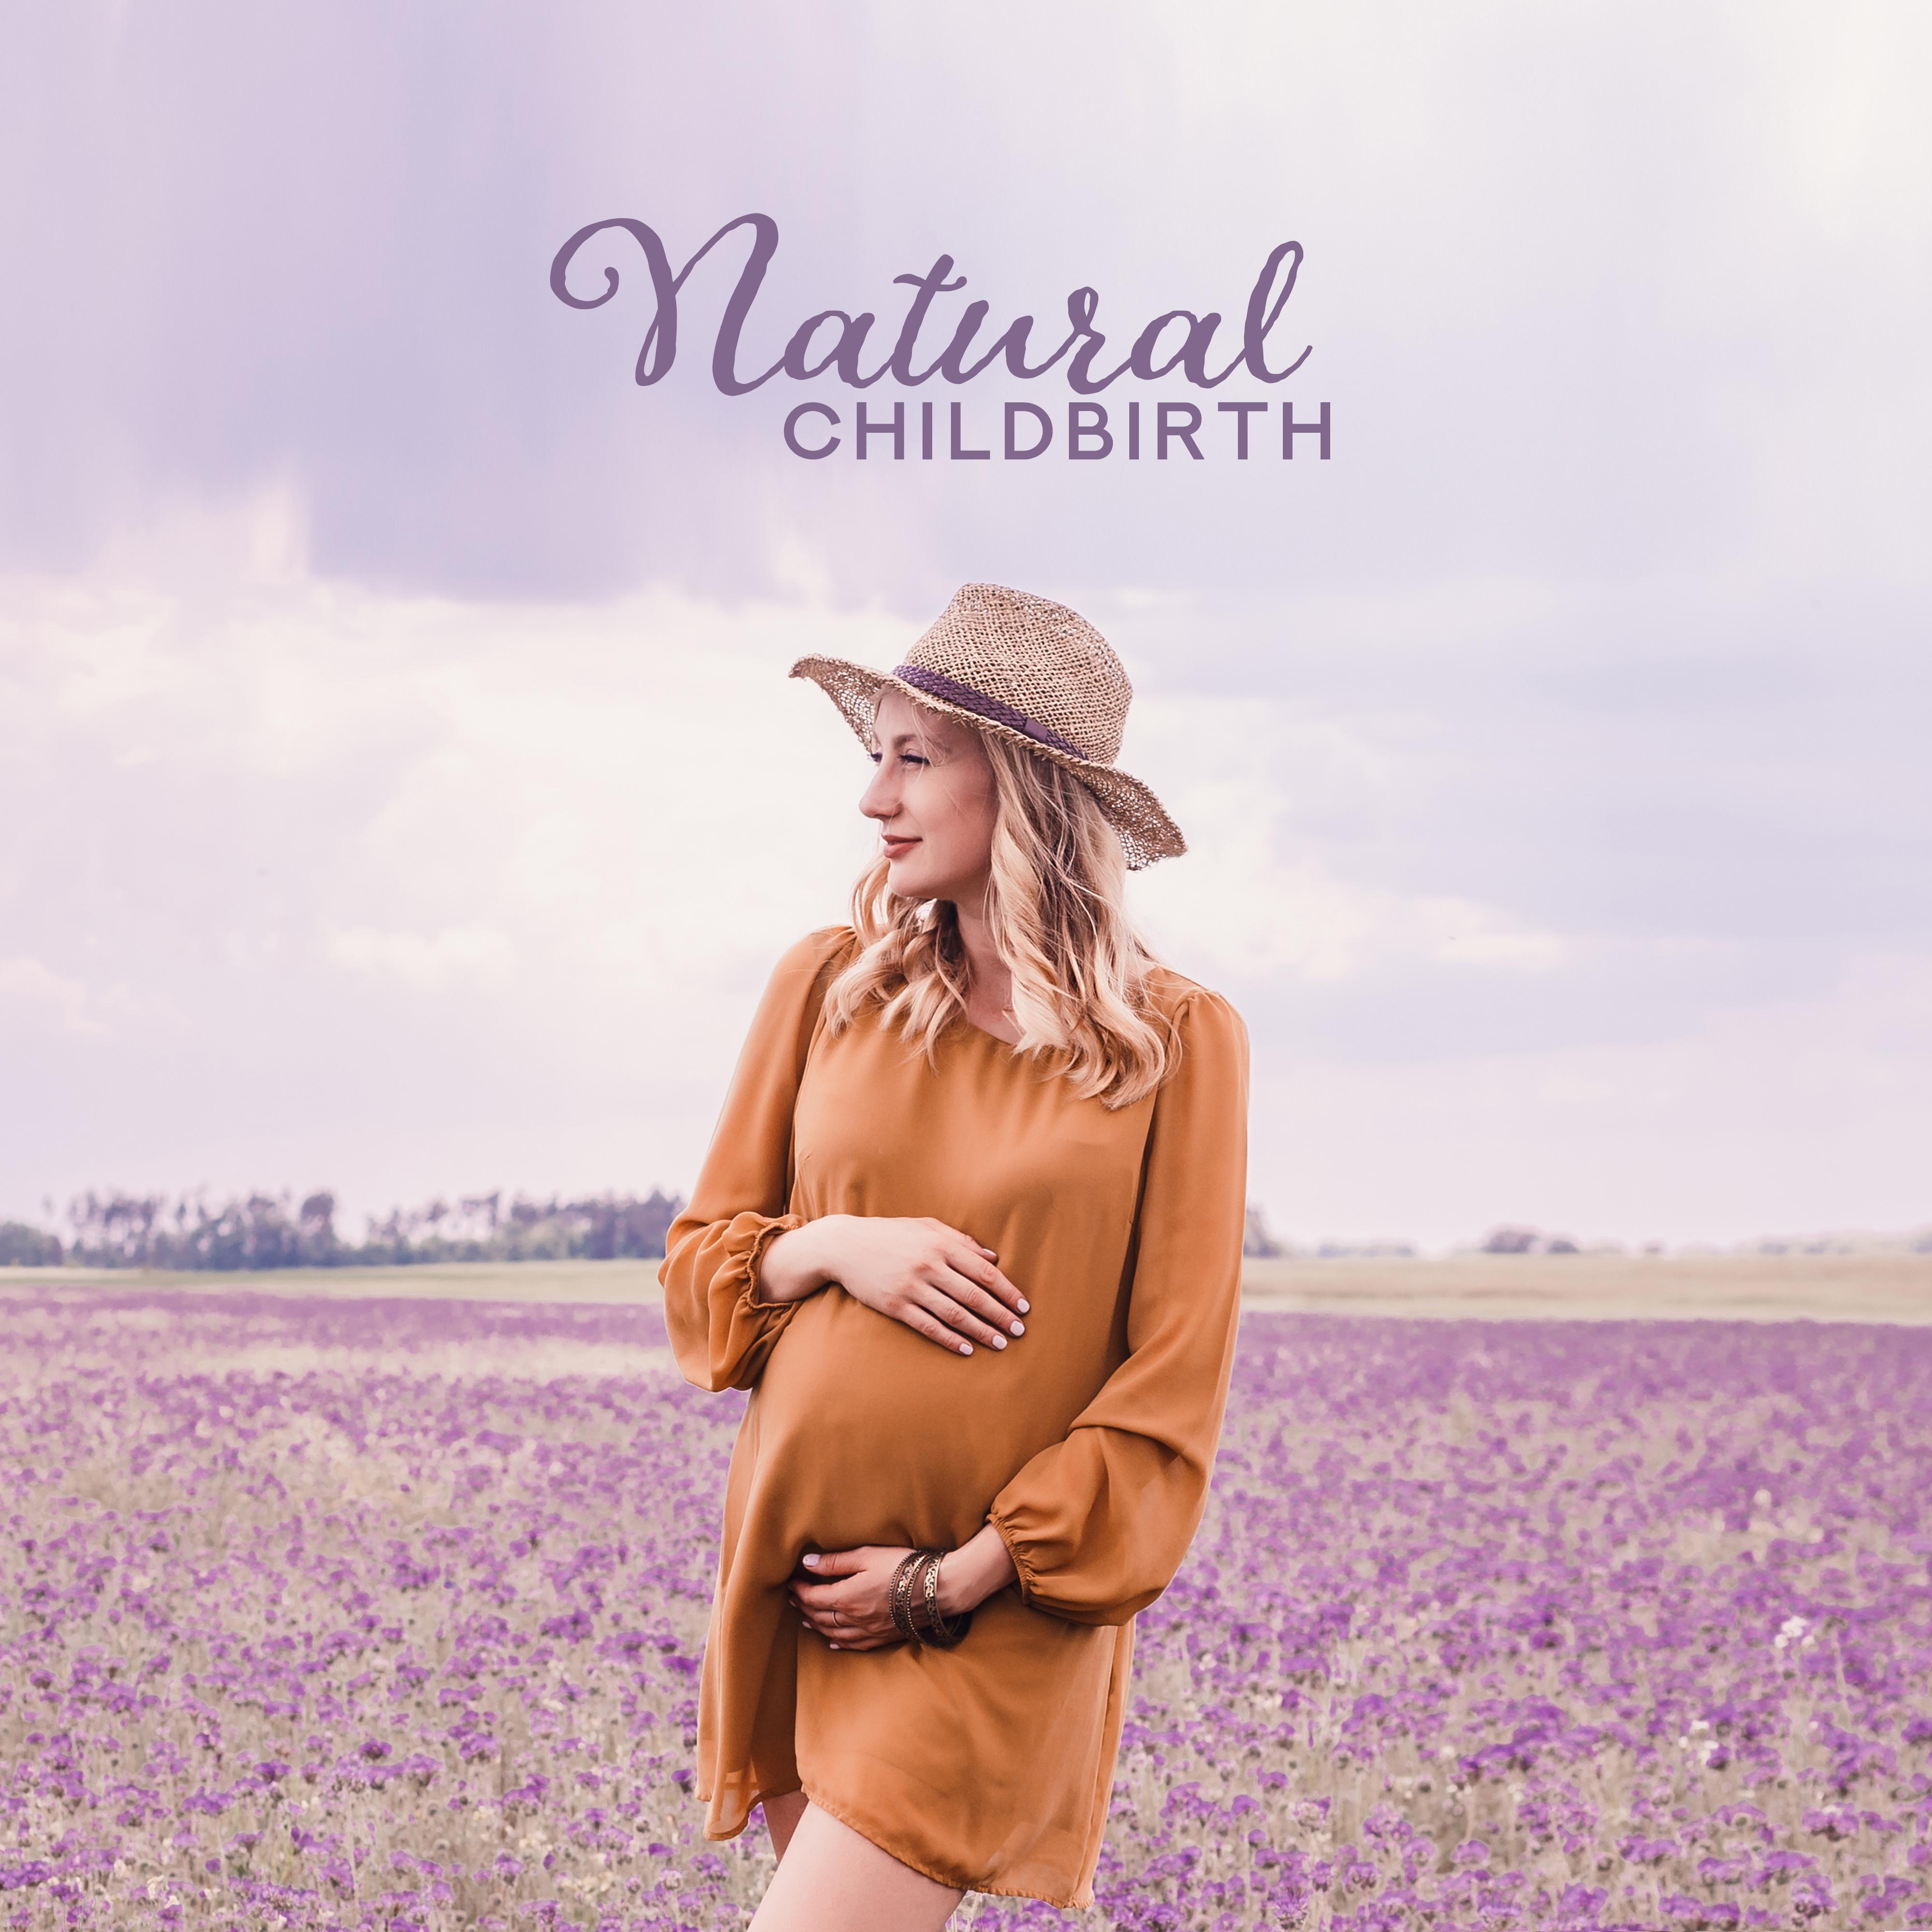 Natural Childbirth: Music of Nature for Relaxation before Childbirth